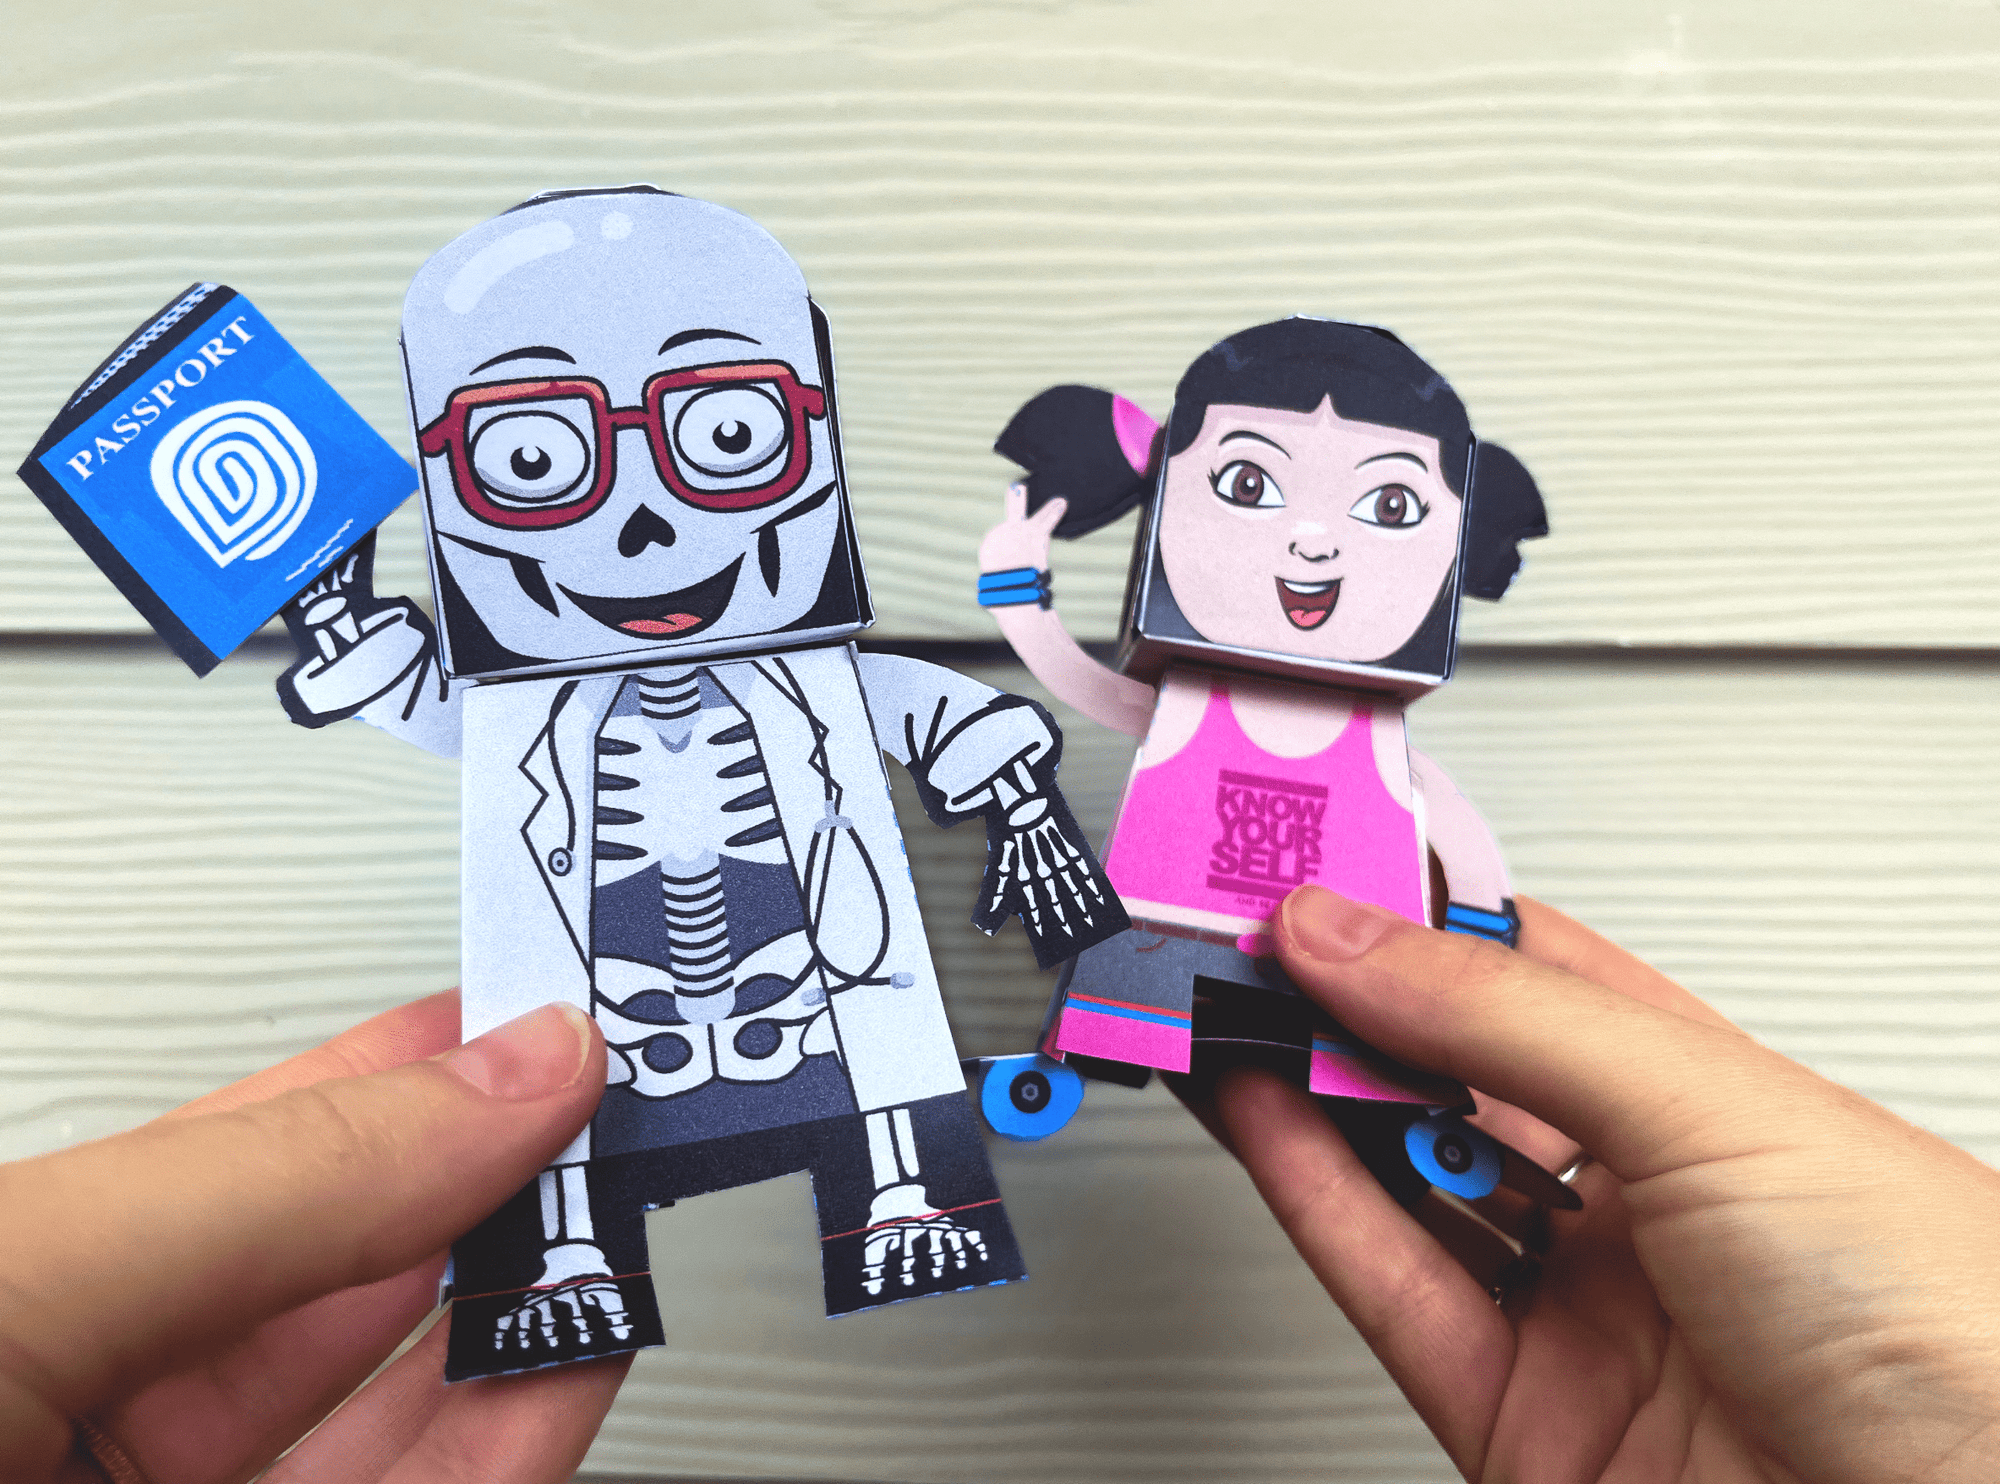 Dr. Bonyfide and Pinky DIY Paper Dolls Health Education for Children